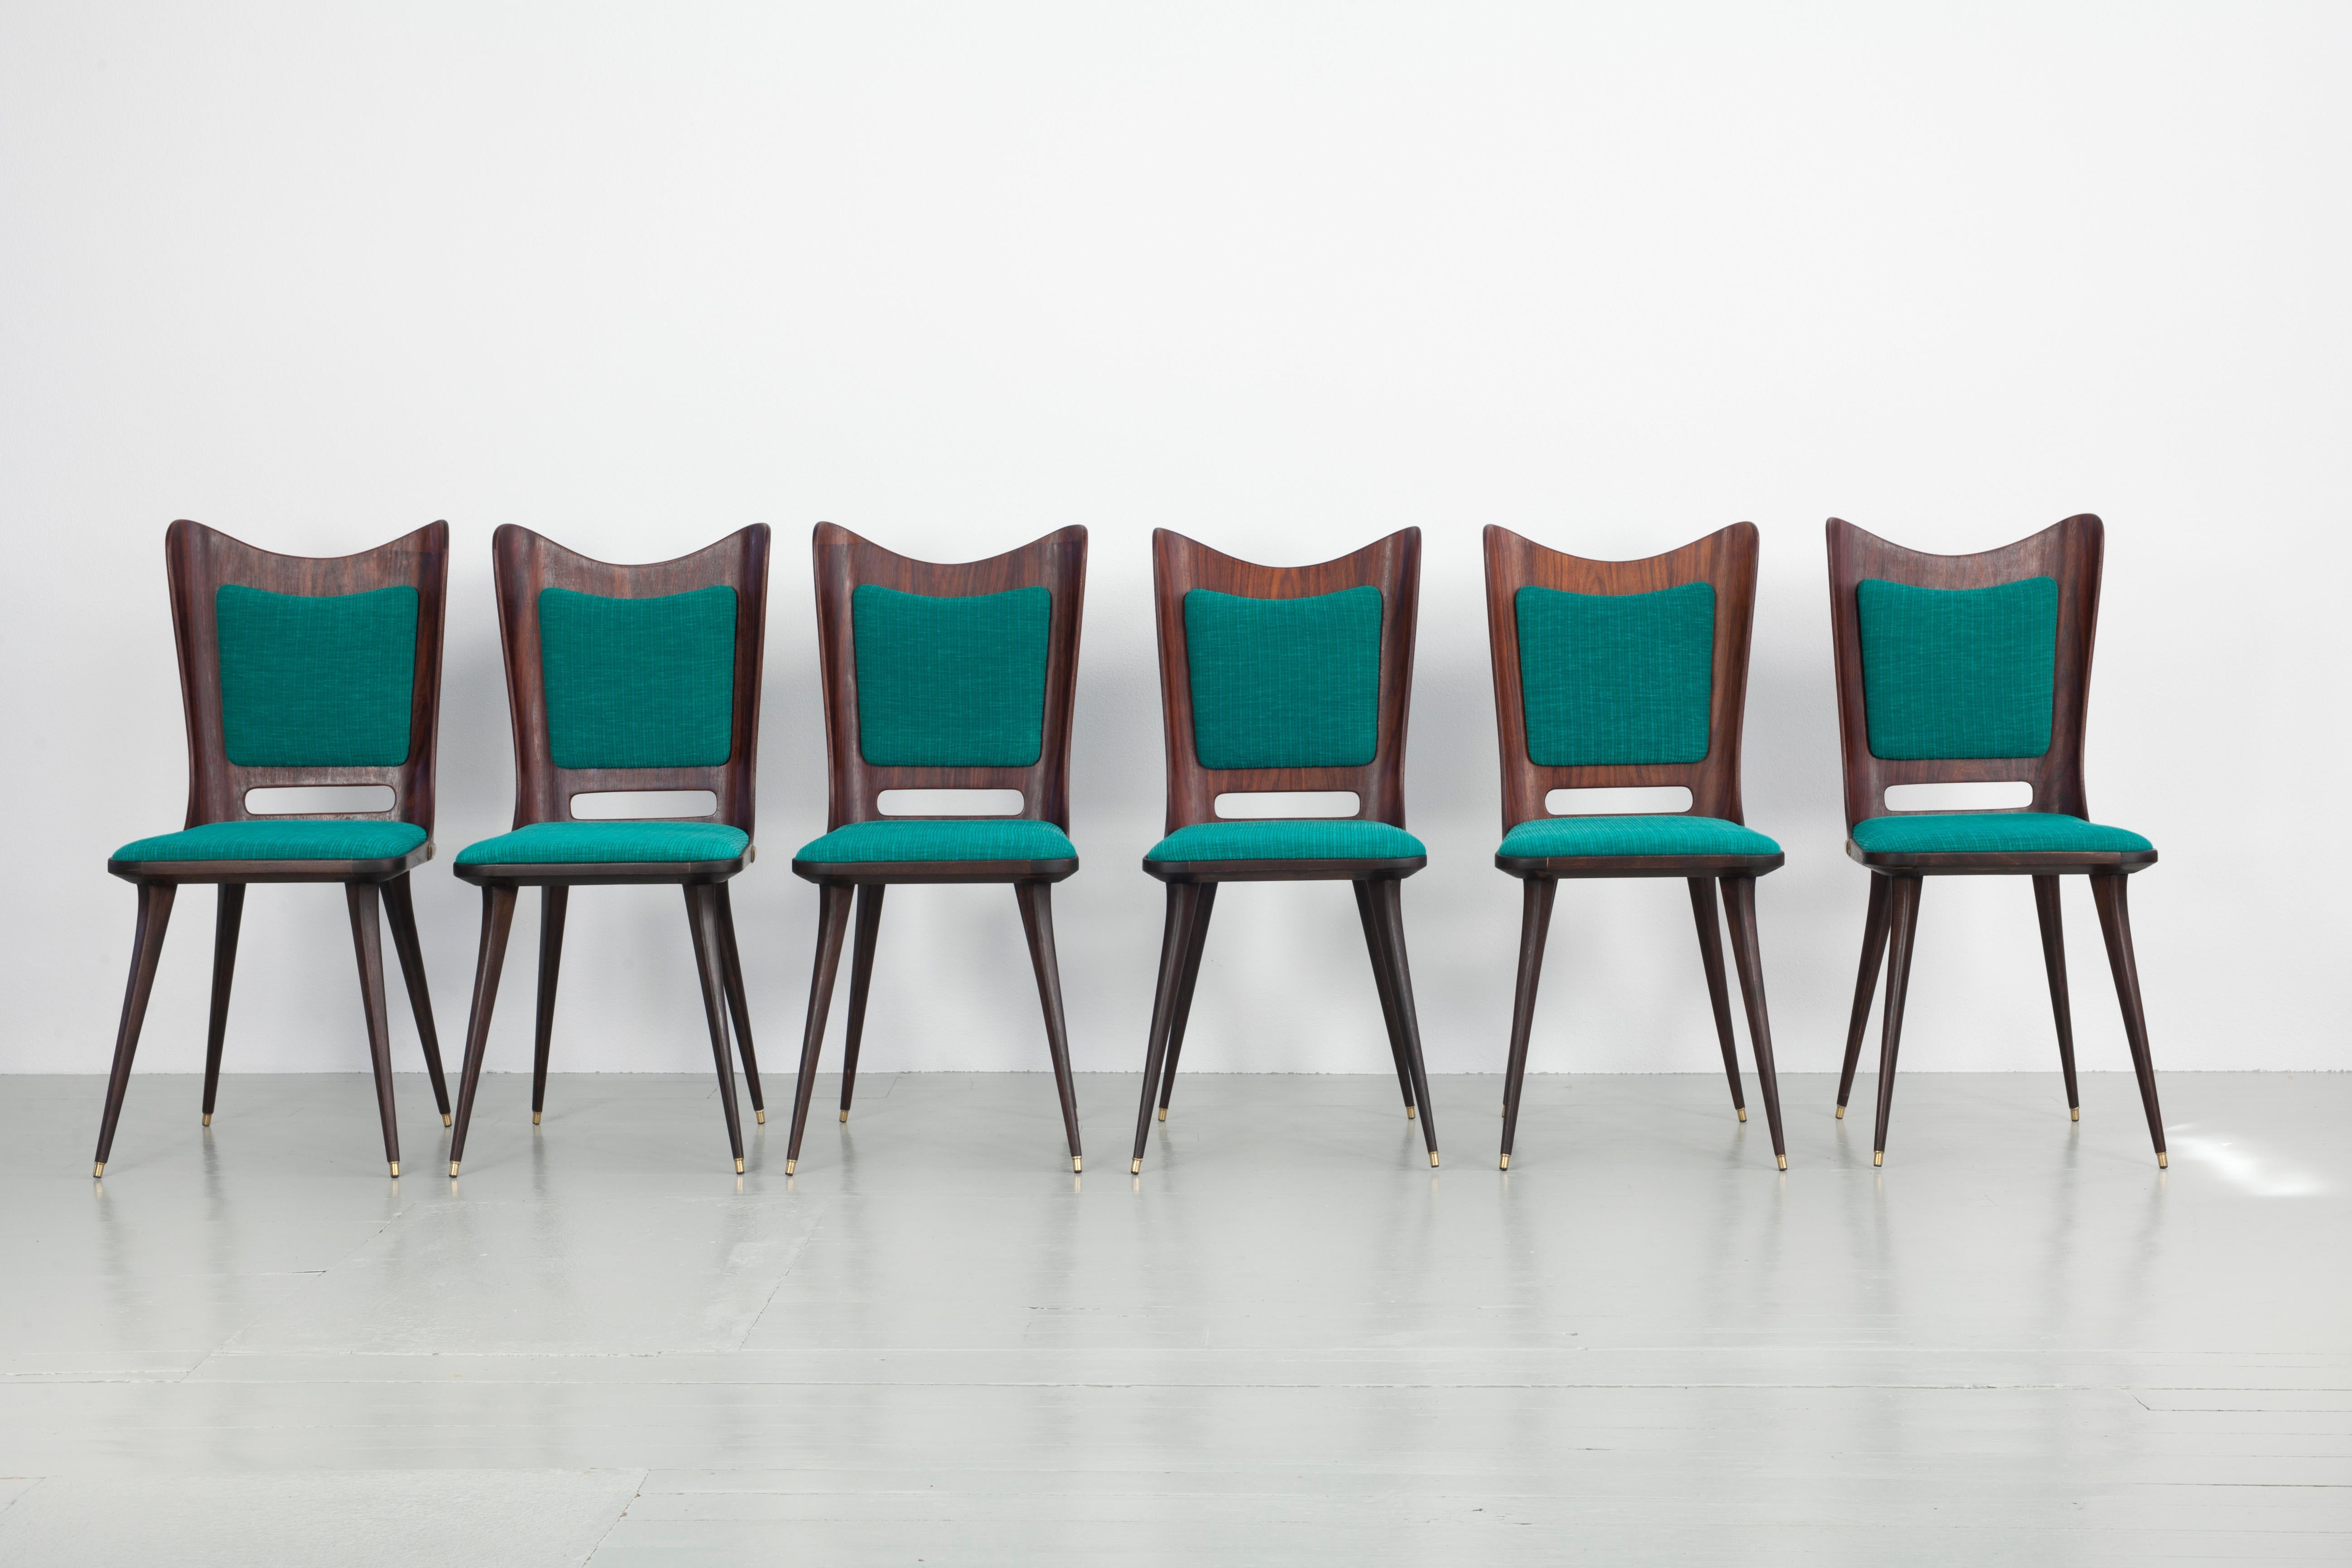 This set of six dining chairs was designed by Carlo Ratti in Italy in the 1950s. The dark rosewood contrasts with the turquoise vintage upholstery and the colour combination makes the chairs look classy and elegant. All pieces have been completely